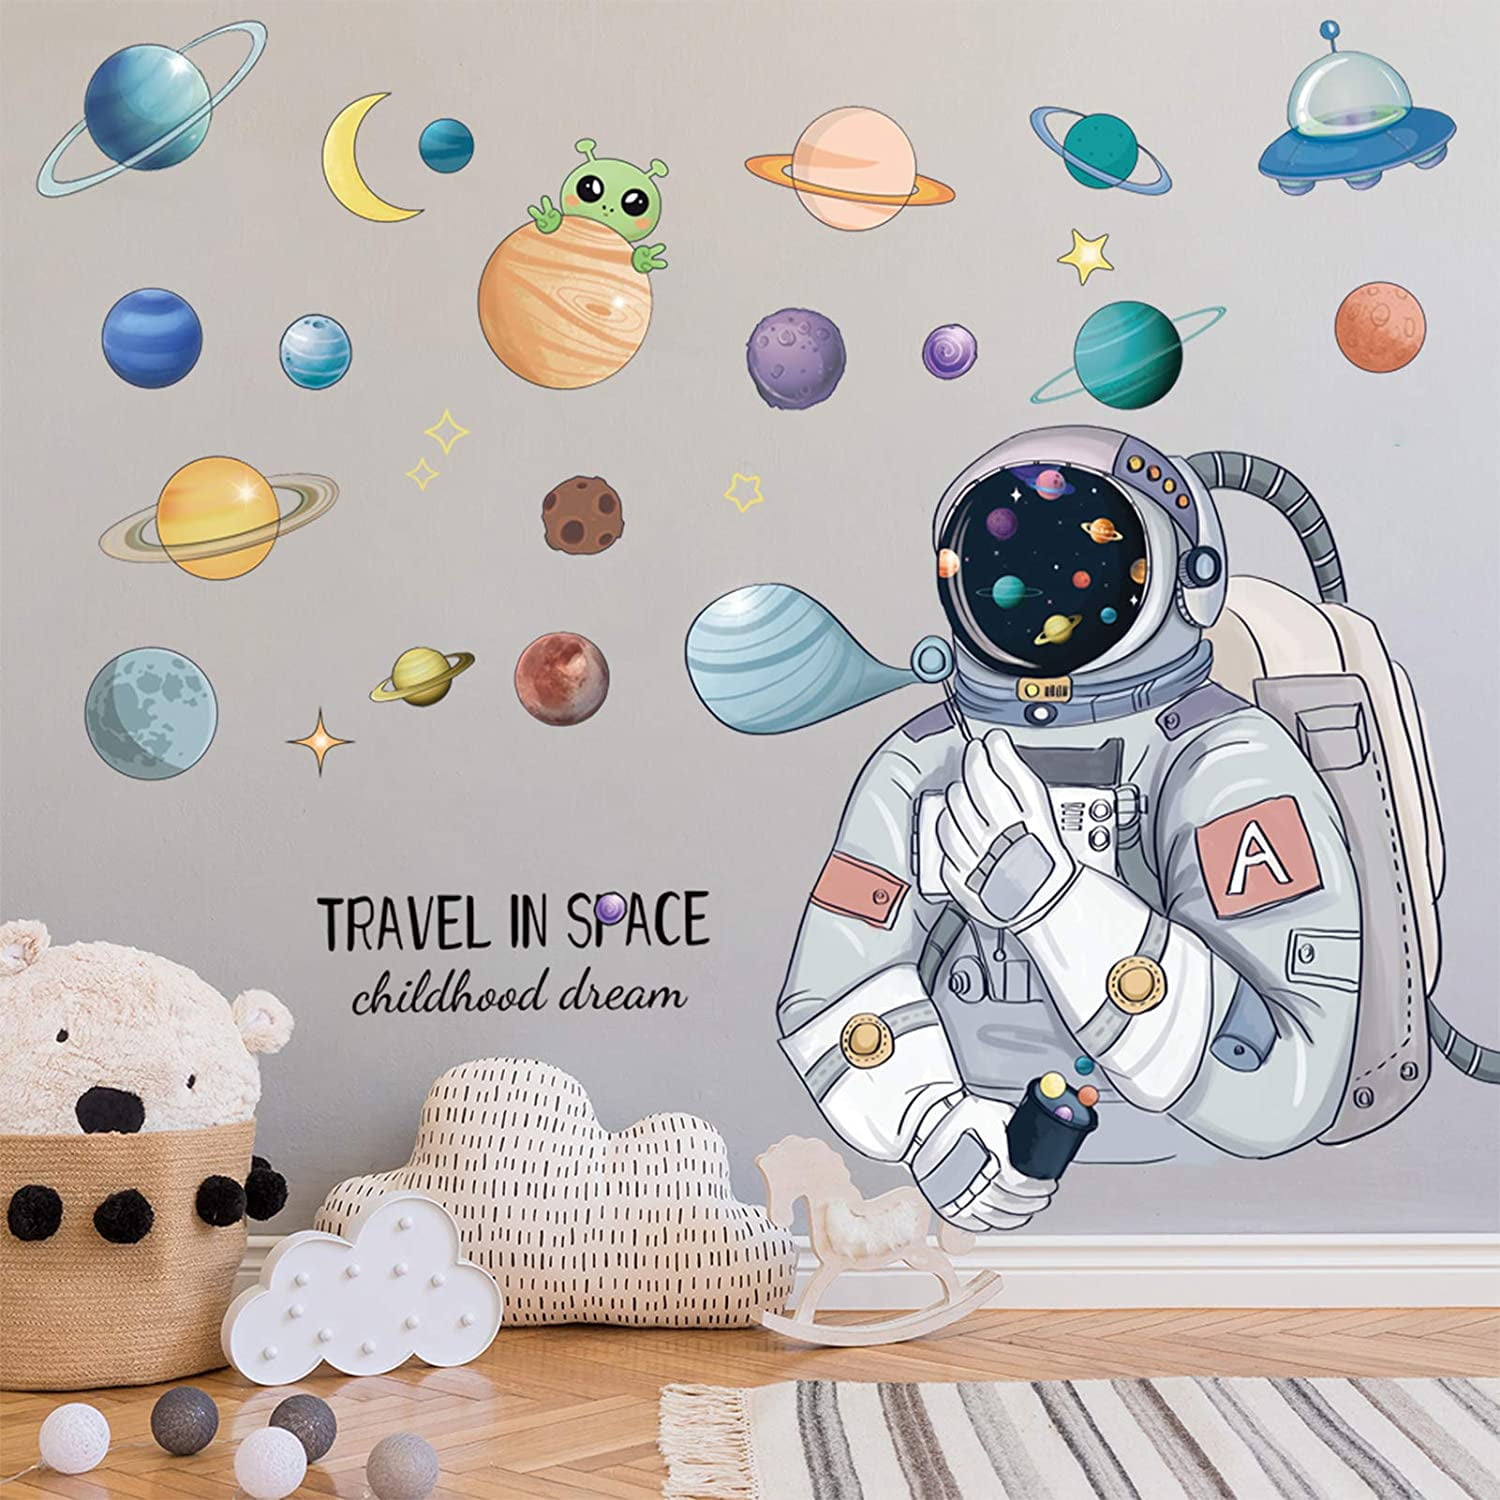 Full Colour Space Ship Window Astronaut Wall Art Sticker Planet Decal Transfer